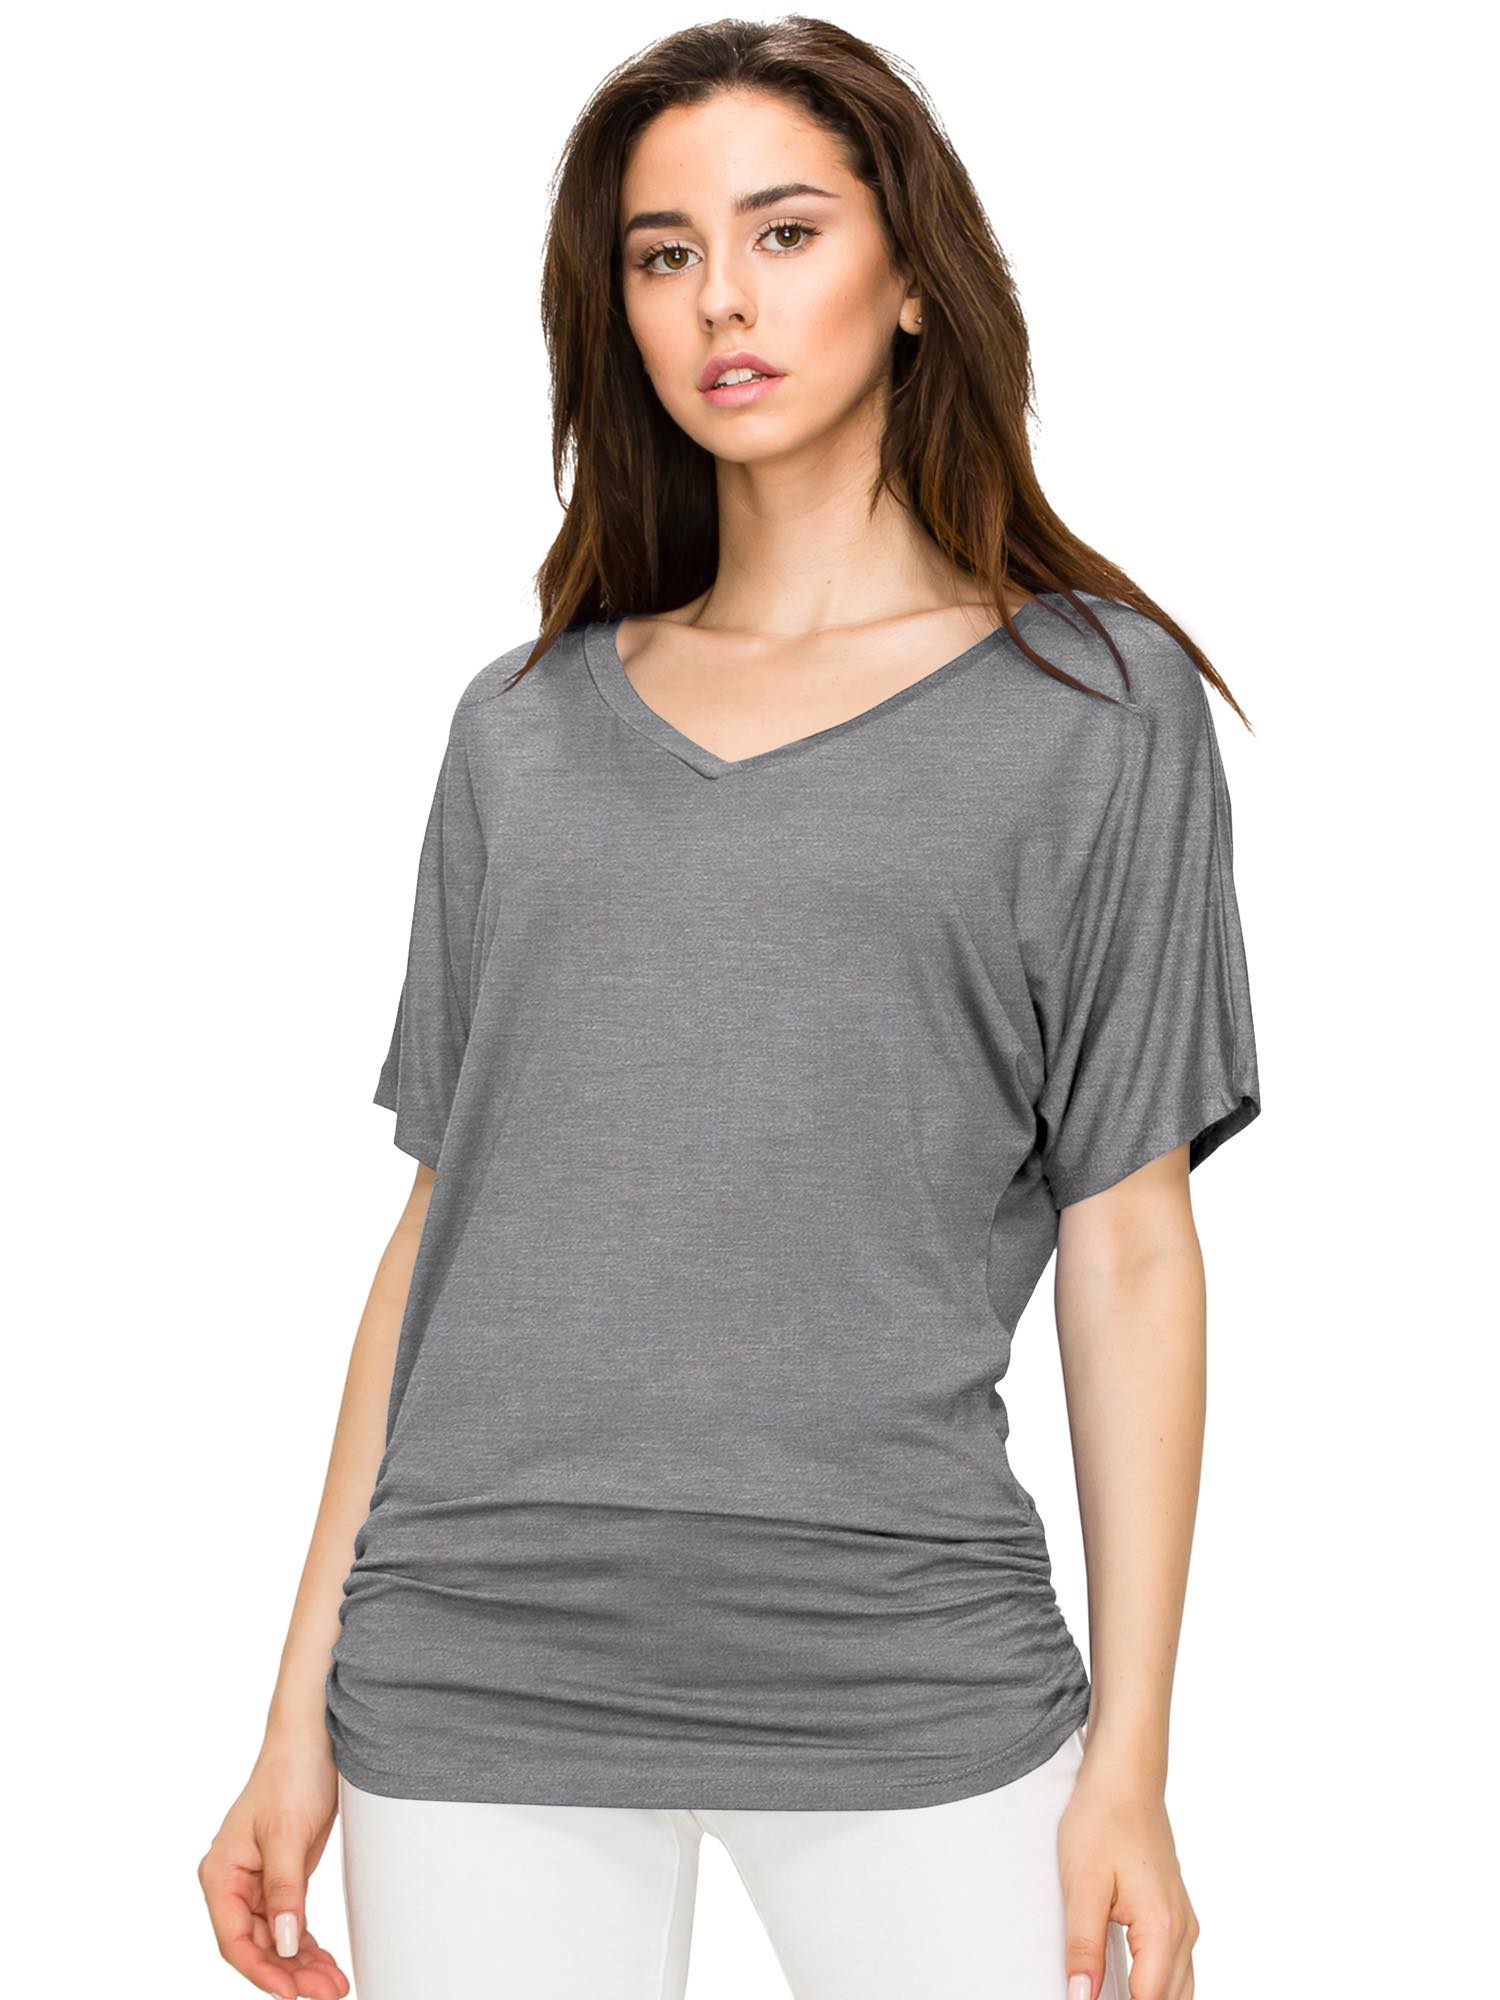 Womens Solid Short Sleeve V-Neck Dolman Top with Side Shirring Daily Haute